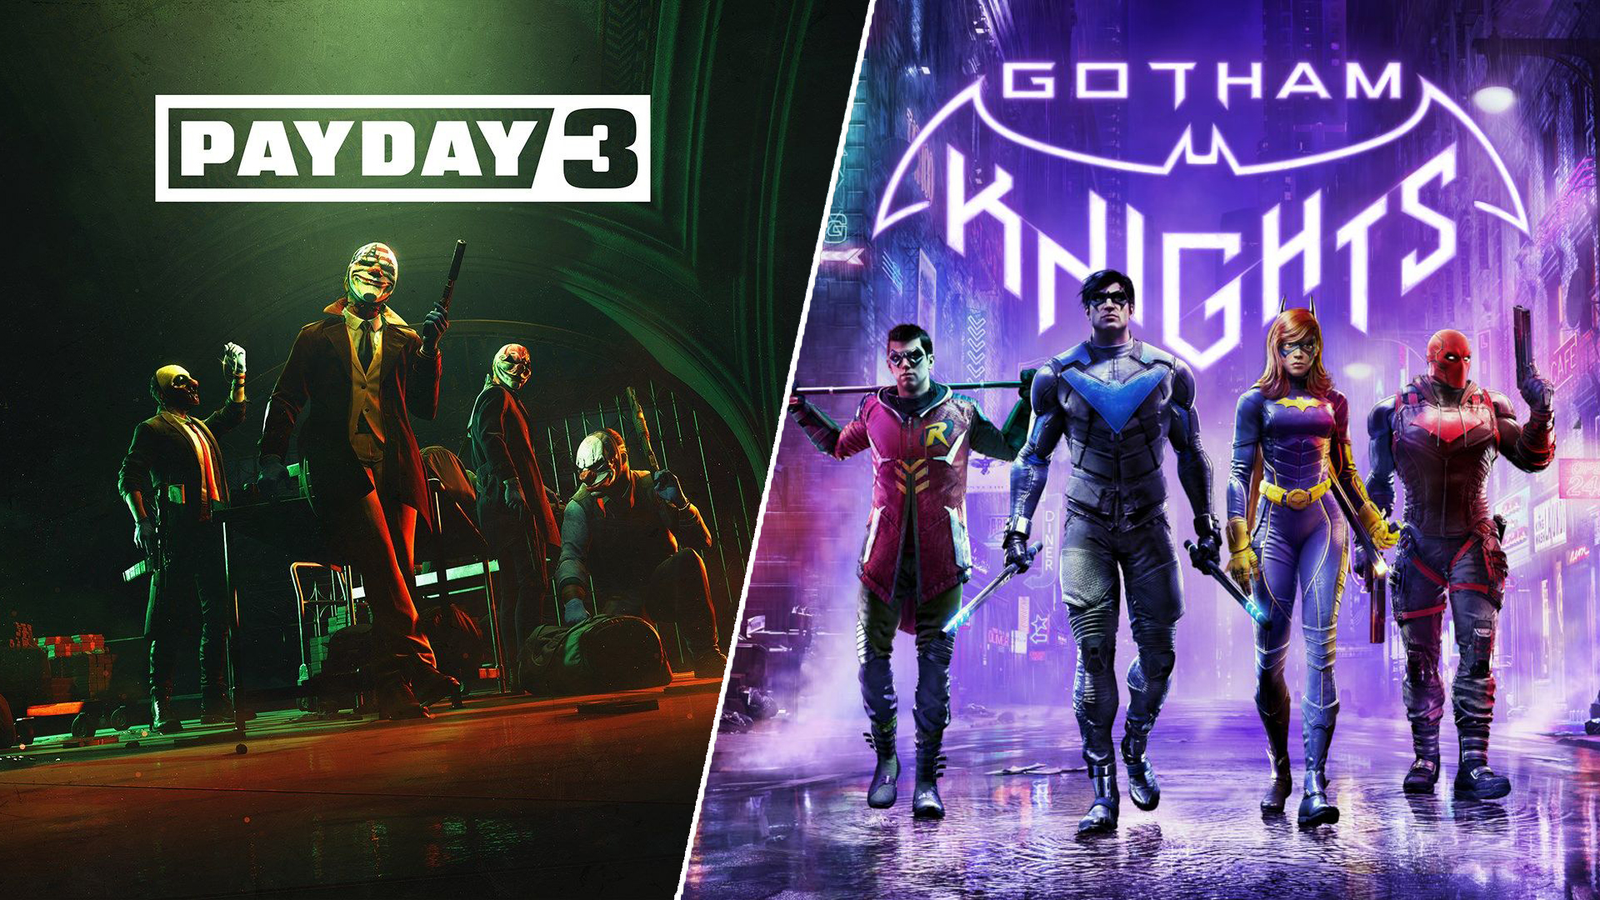 Xbox Game Pass September line-up - Gotham Knights and Payday 3 continue  HUGE month, Gaming, Entertainment